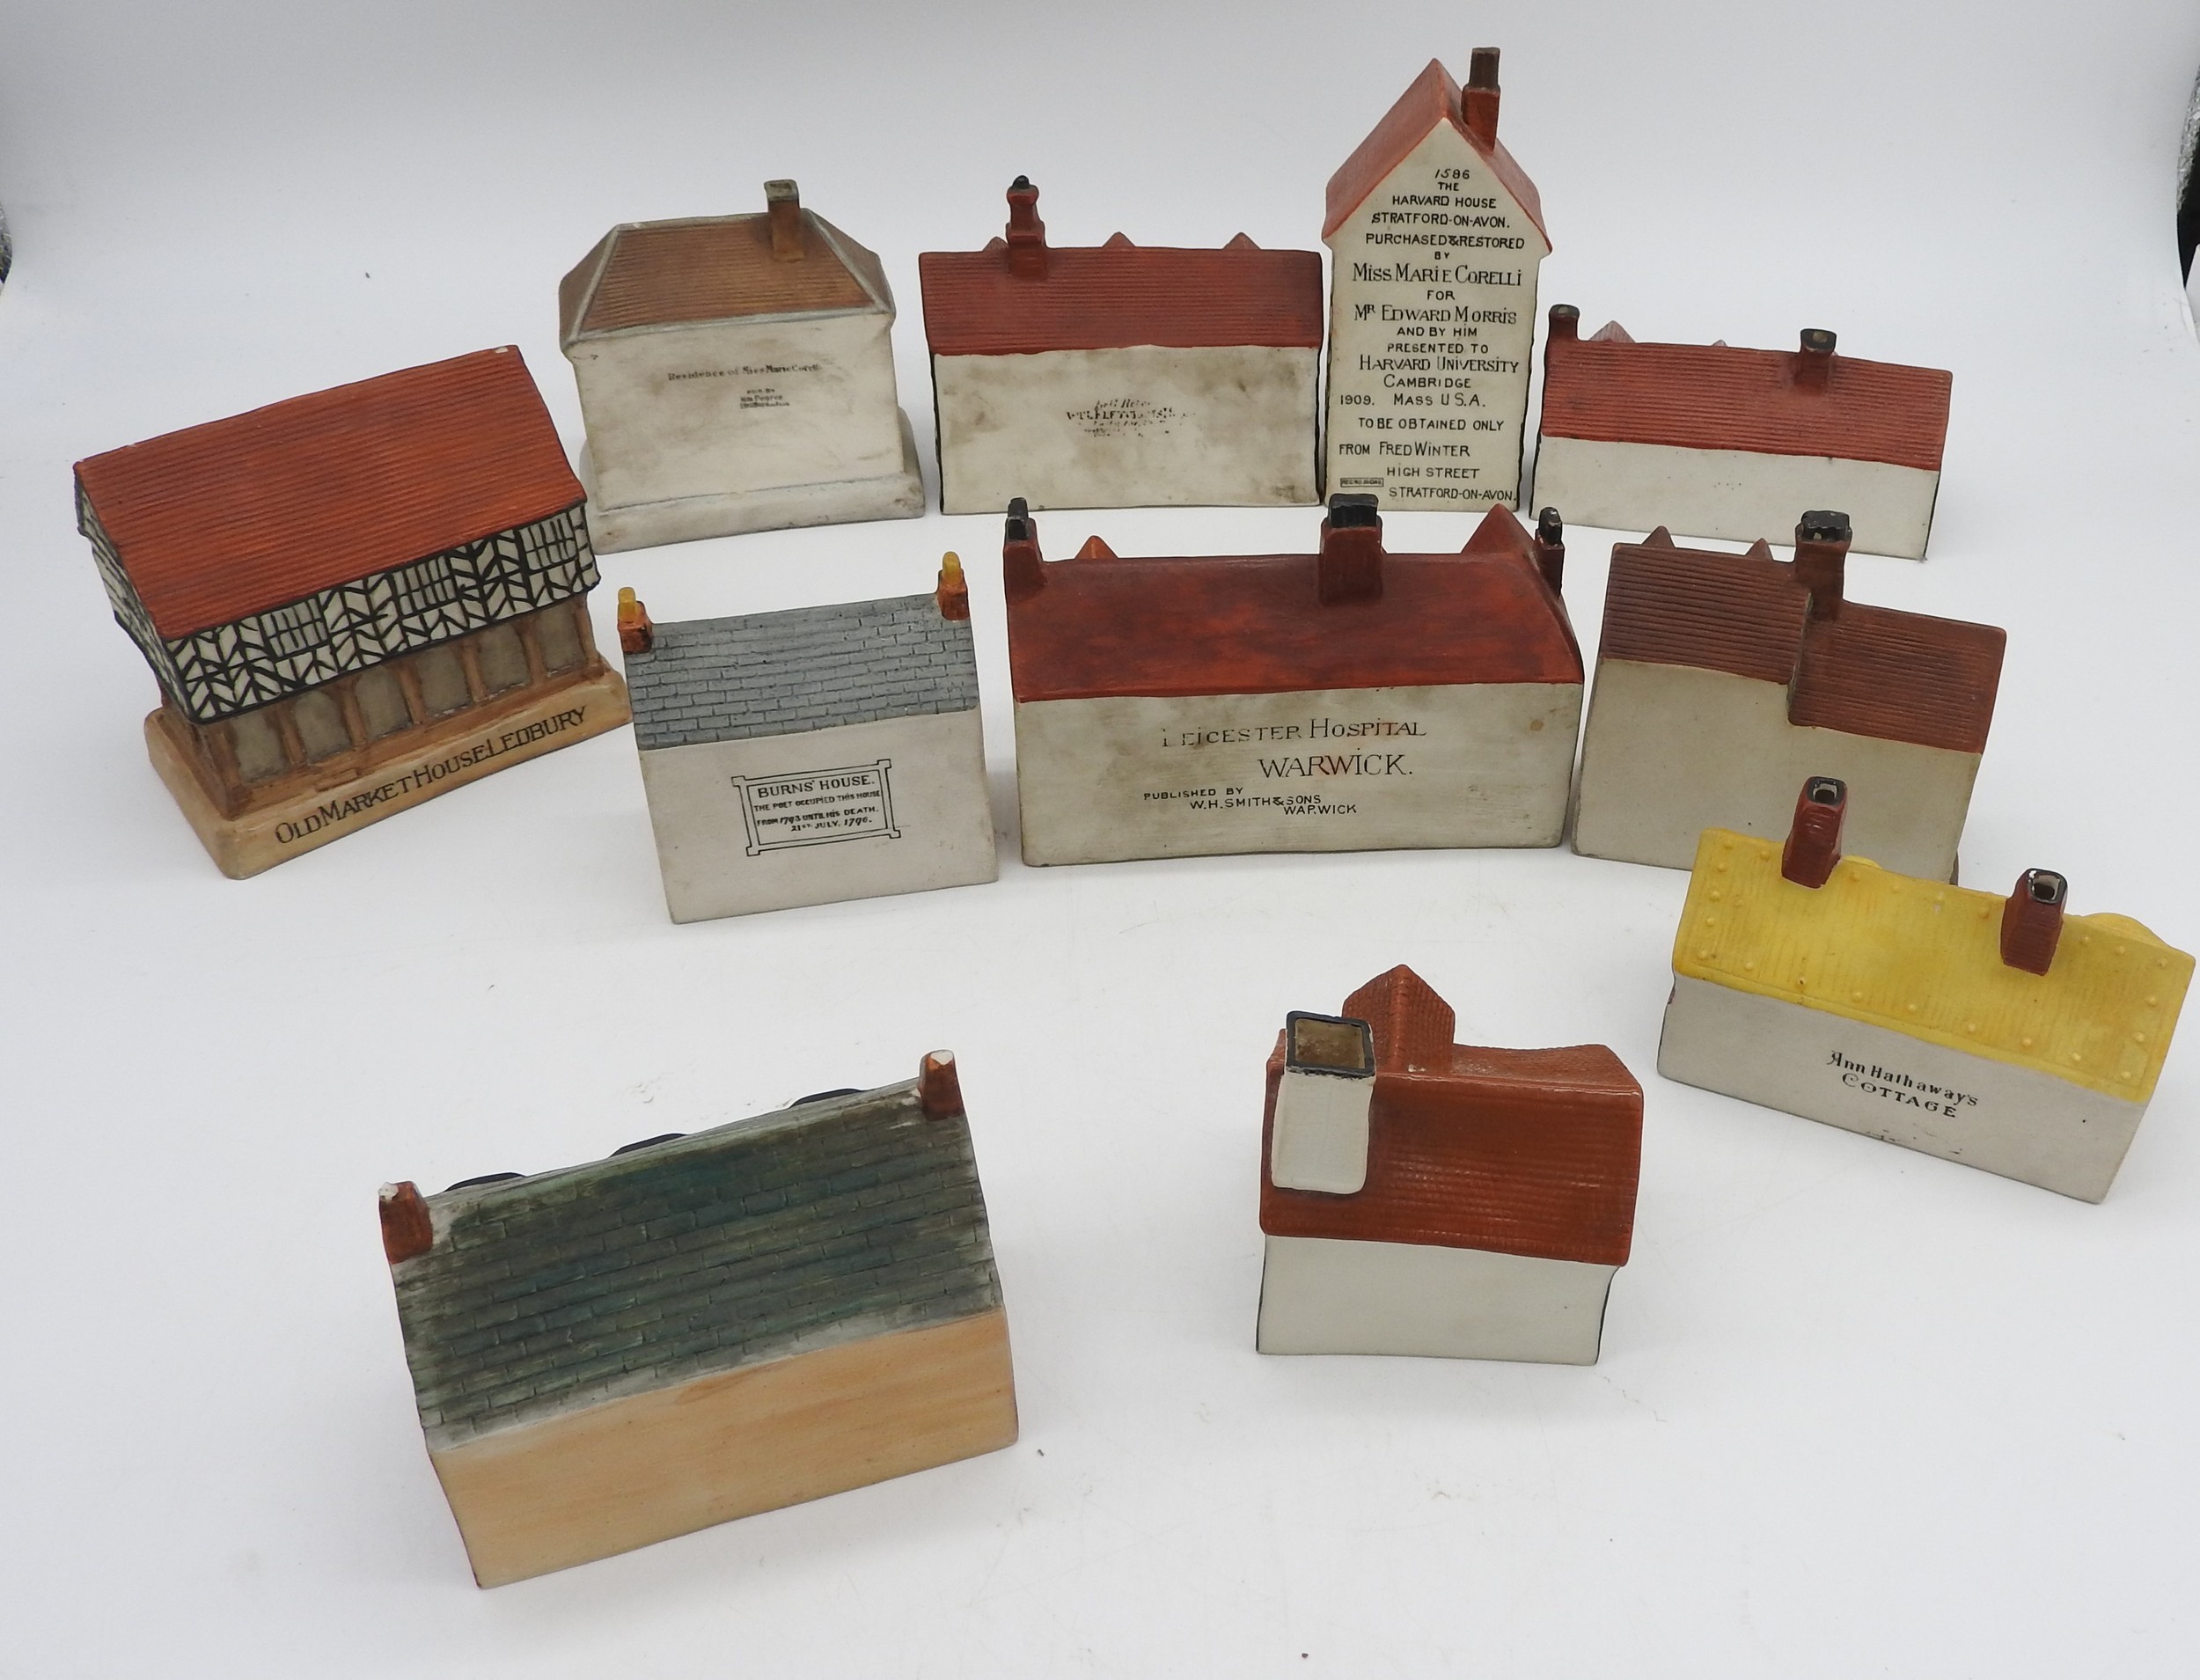 A WILLOW ART CHINA MODEL OF BURN’S HOUSE, a model of Leicester Hospital, Warwick, published by W. - Image 2 of 5